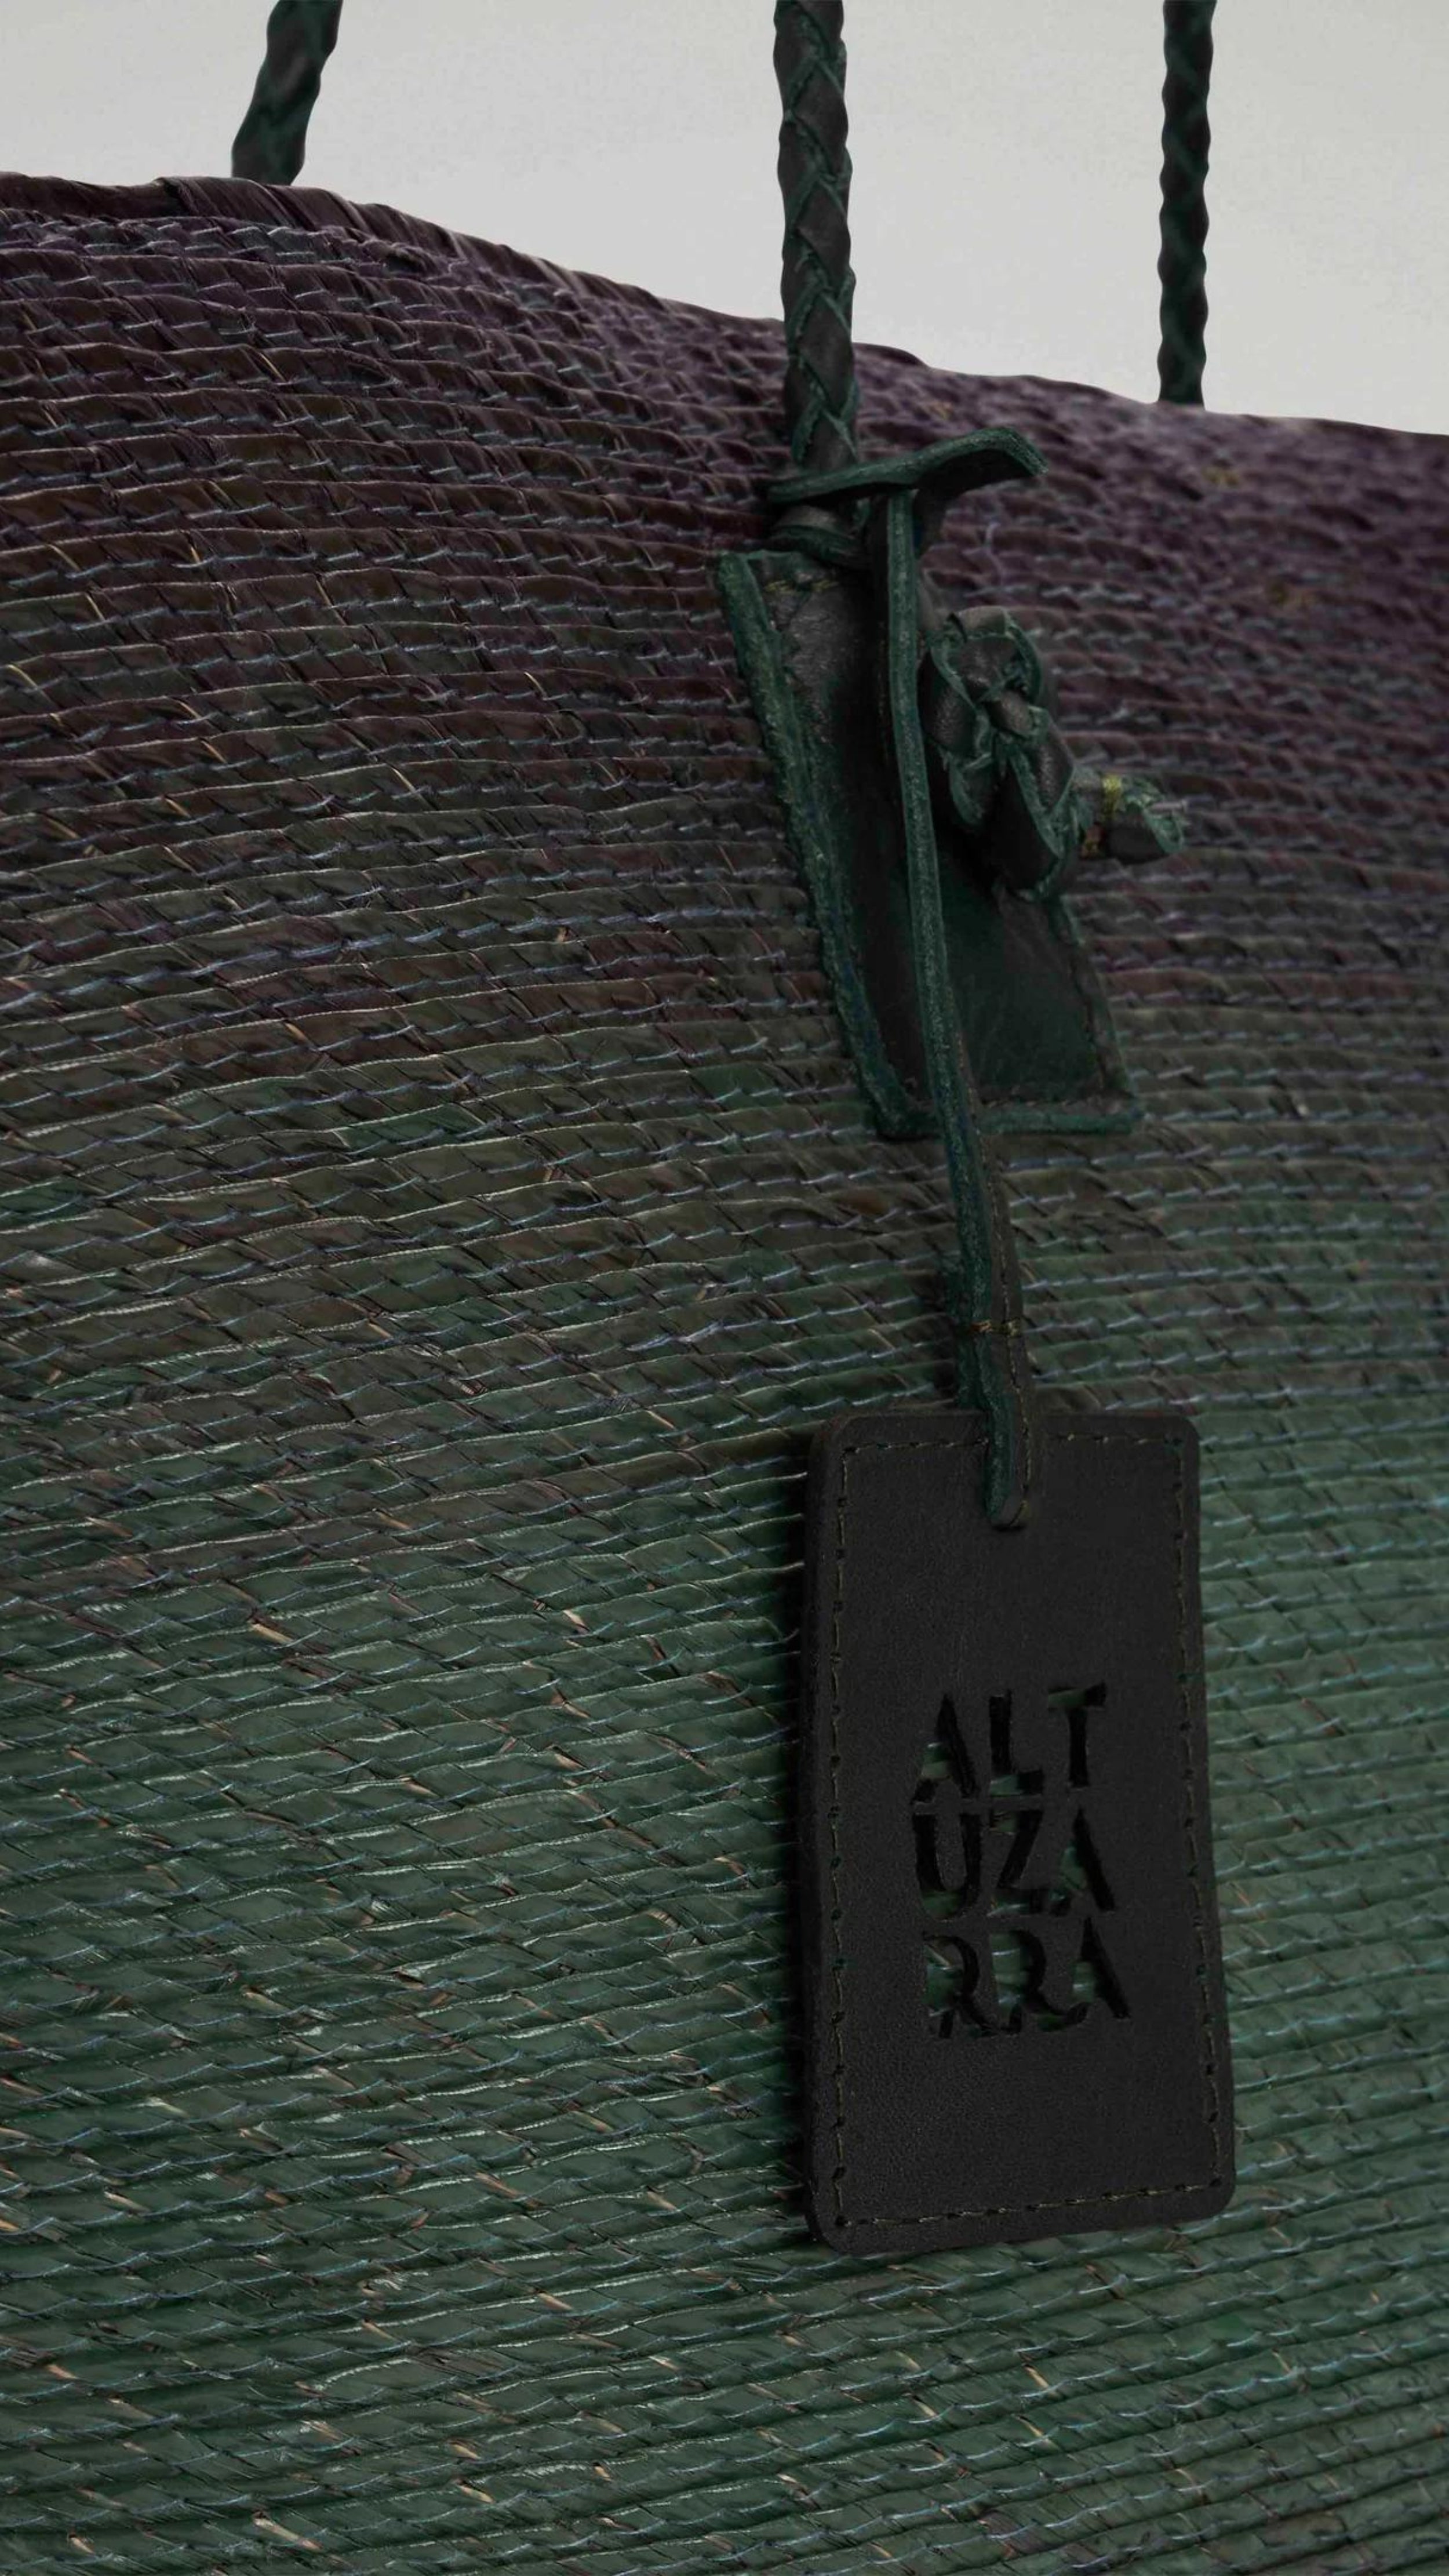 Altruzarra Large Watermill Bag in Campo. A summer raffia tote bag handmade in Mexico. It has a ombre tone with black and green. With a braided leather strap and black leather details. This photo shows a close up of the Altruzarra leather tag.. Available at experience 27 in Madrid Spain. 